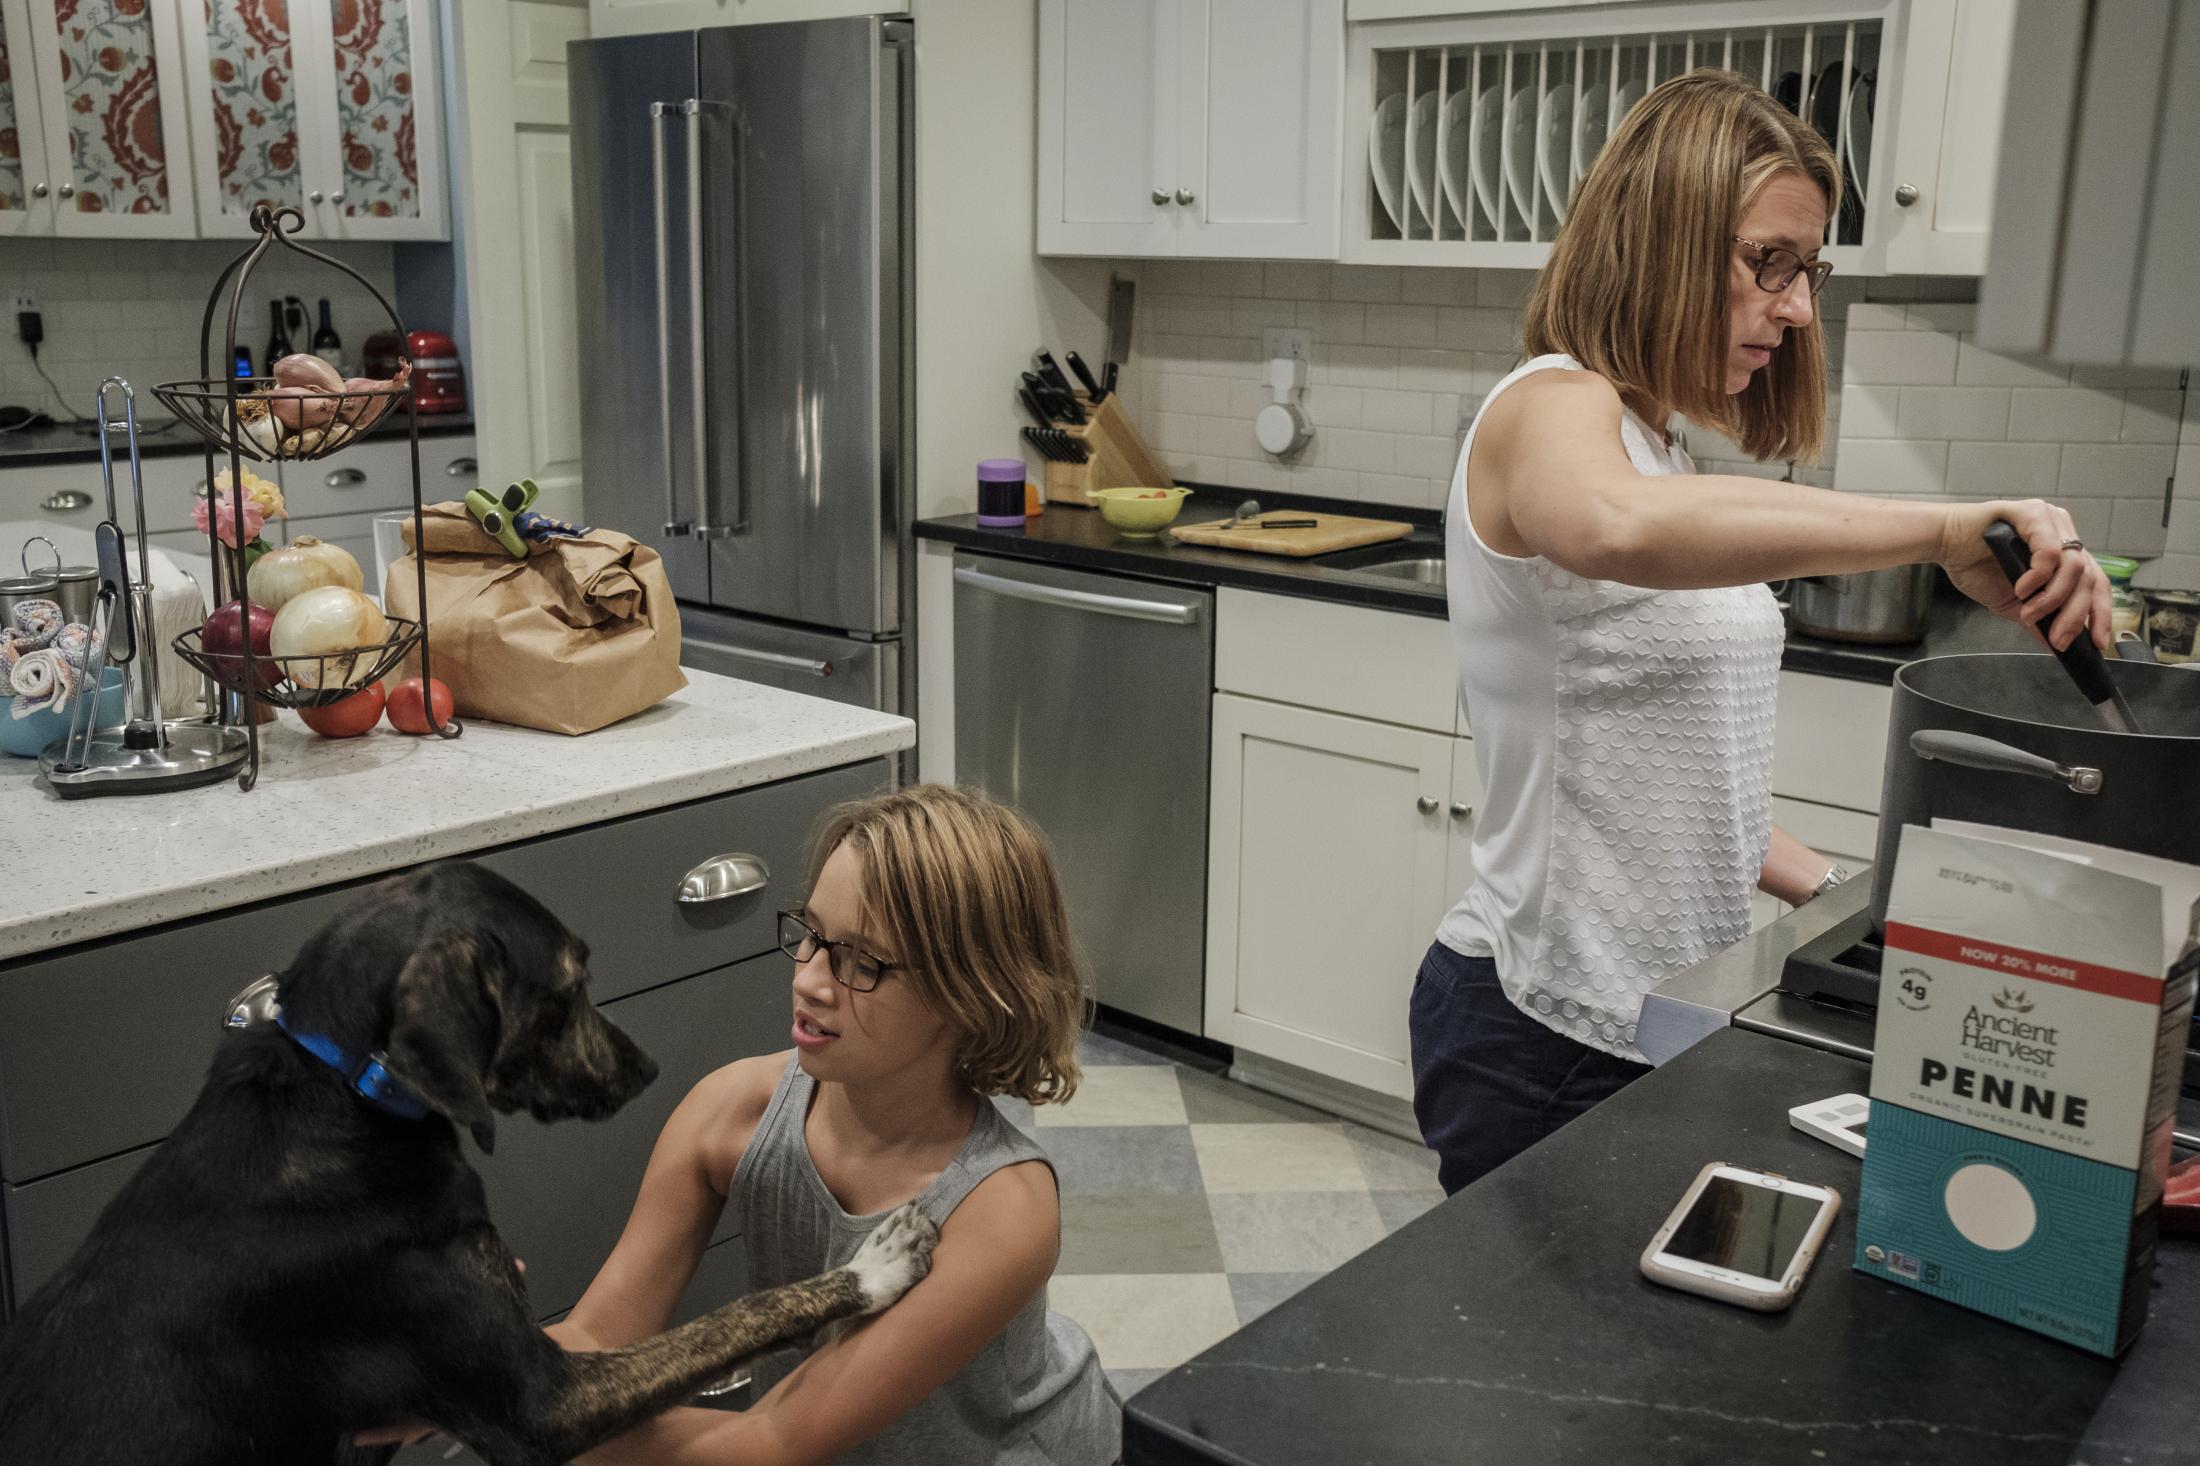 Jeri Seidman cooking dinner while her daughter Hannah plays with her dog Quin at their house in Charlottesville, Virginia, U.S., on Monday Sept. 23, 2019. Hannah is a patient in a genetic risk study about type 1 diabetes at University of Virginia. Photographer: Carlos Bernate/ NPR